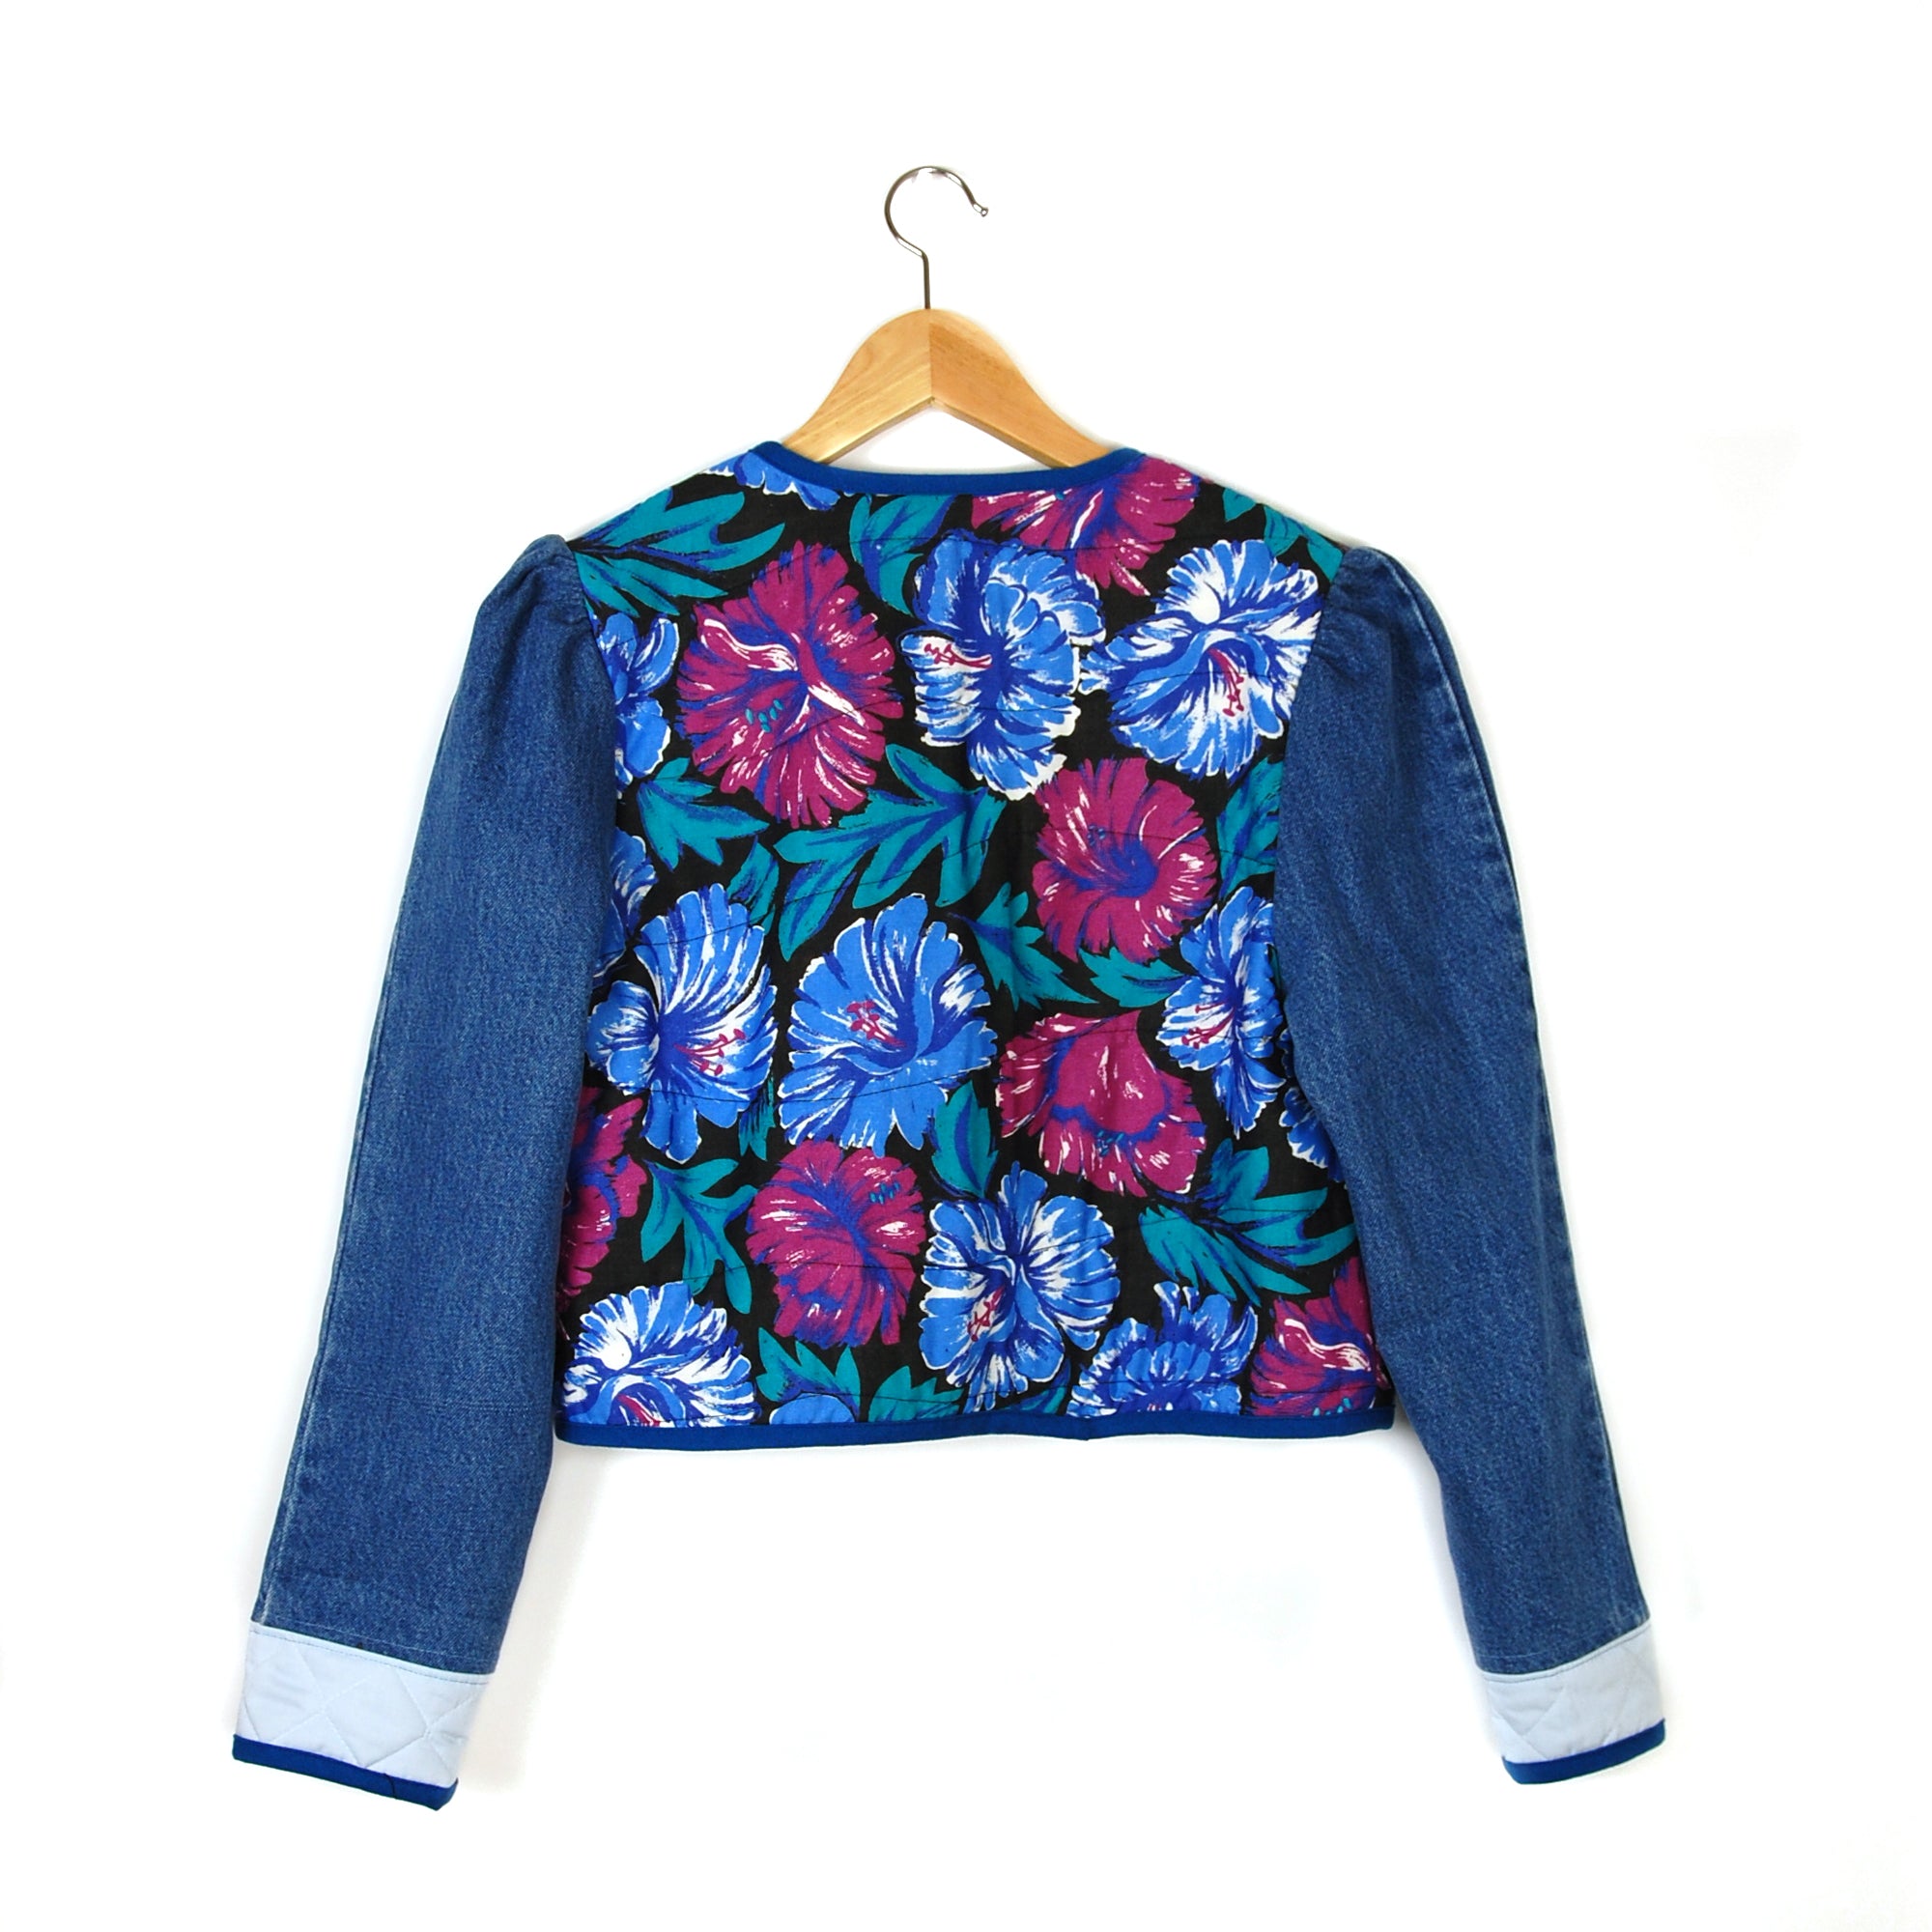 BLUE HIBISCUS 1 QUILTED JACKET - Late to the Party